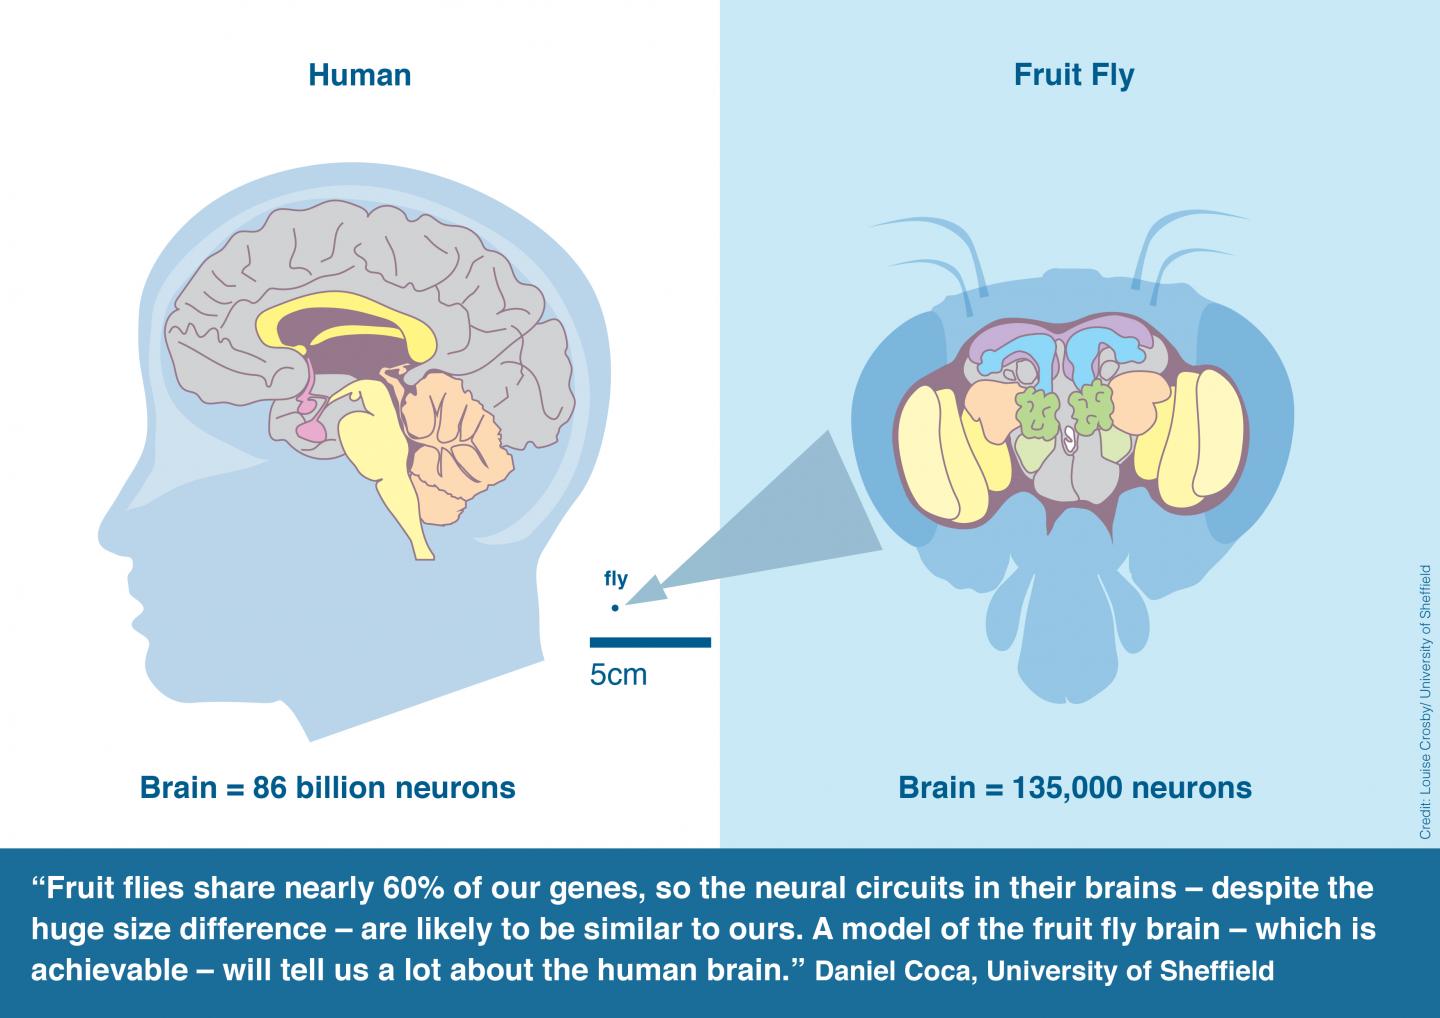 Human and Fruit Fly Brain Comparison